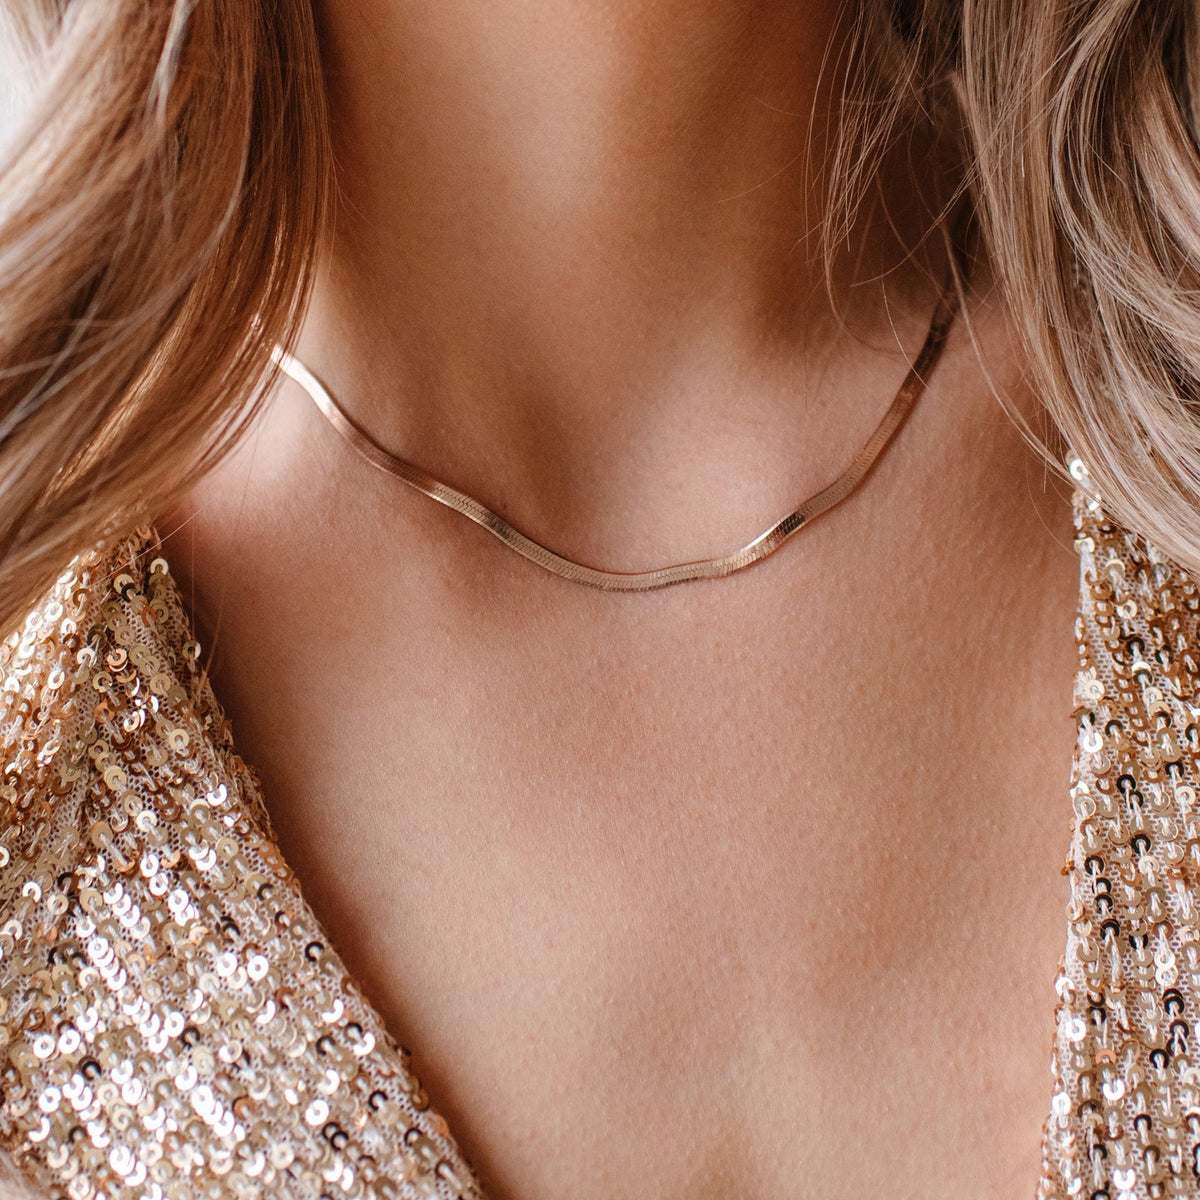 CHARMING HERRINGBONE CHAIN 14.5 - 16&quot; NECKLACE ROSE GOLD - SO PRETTY CARA COTTER